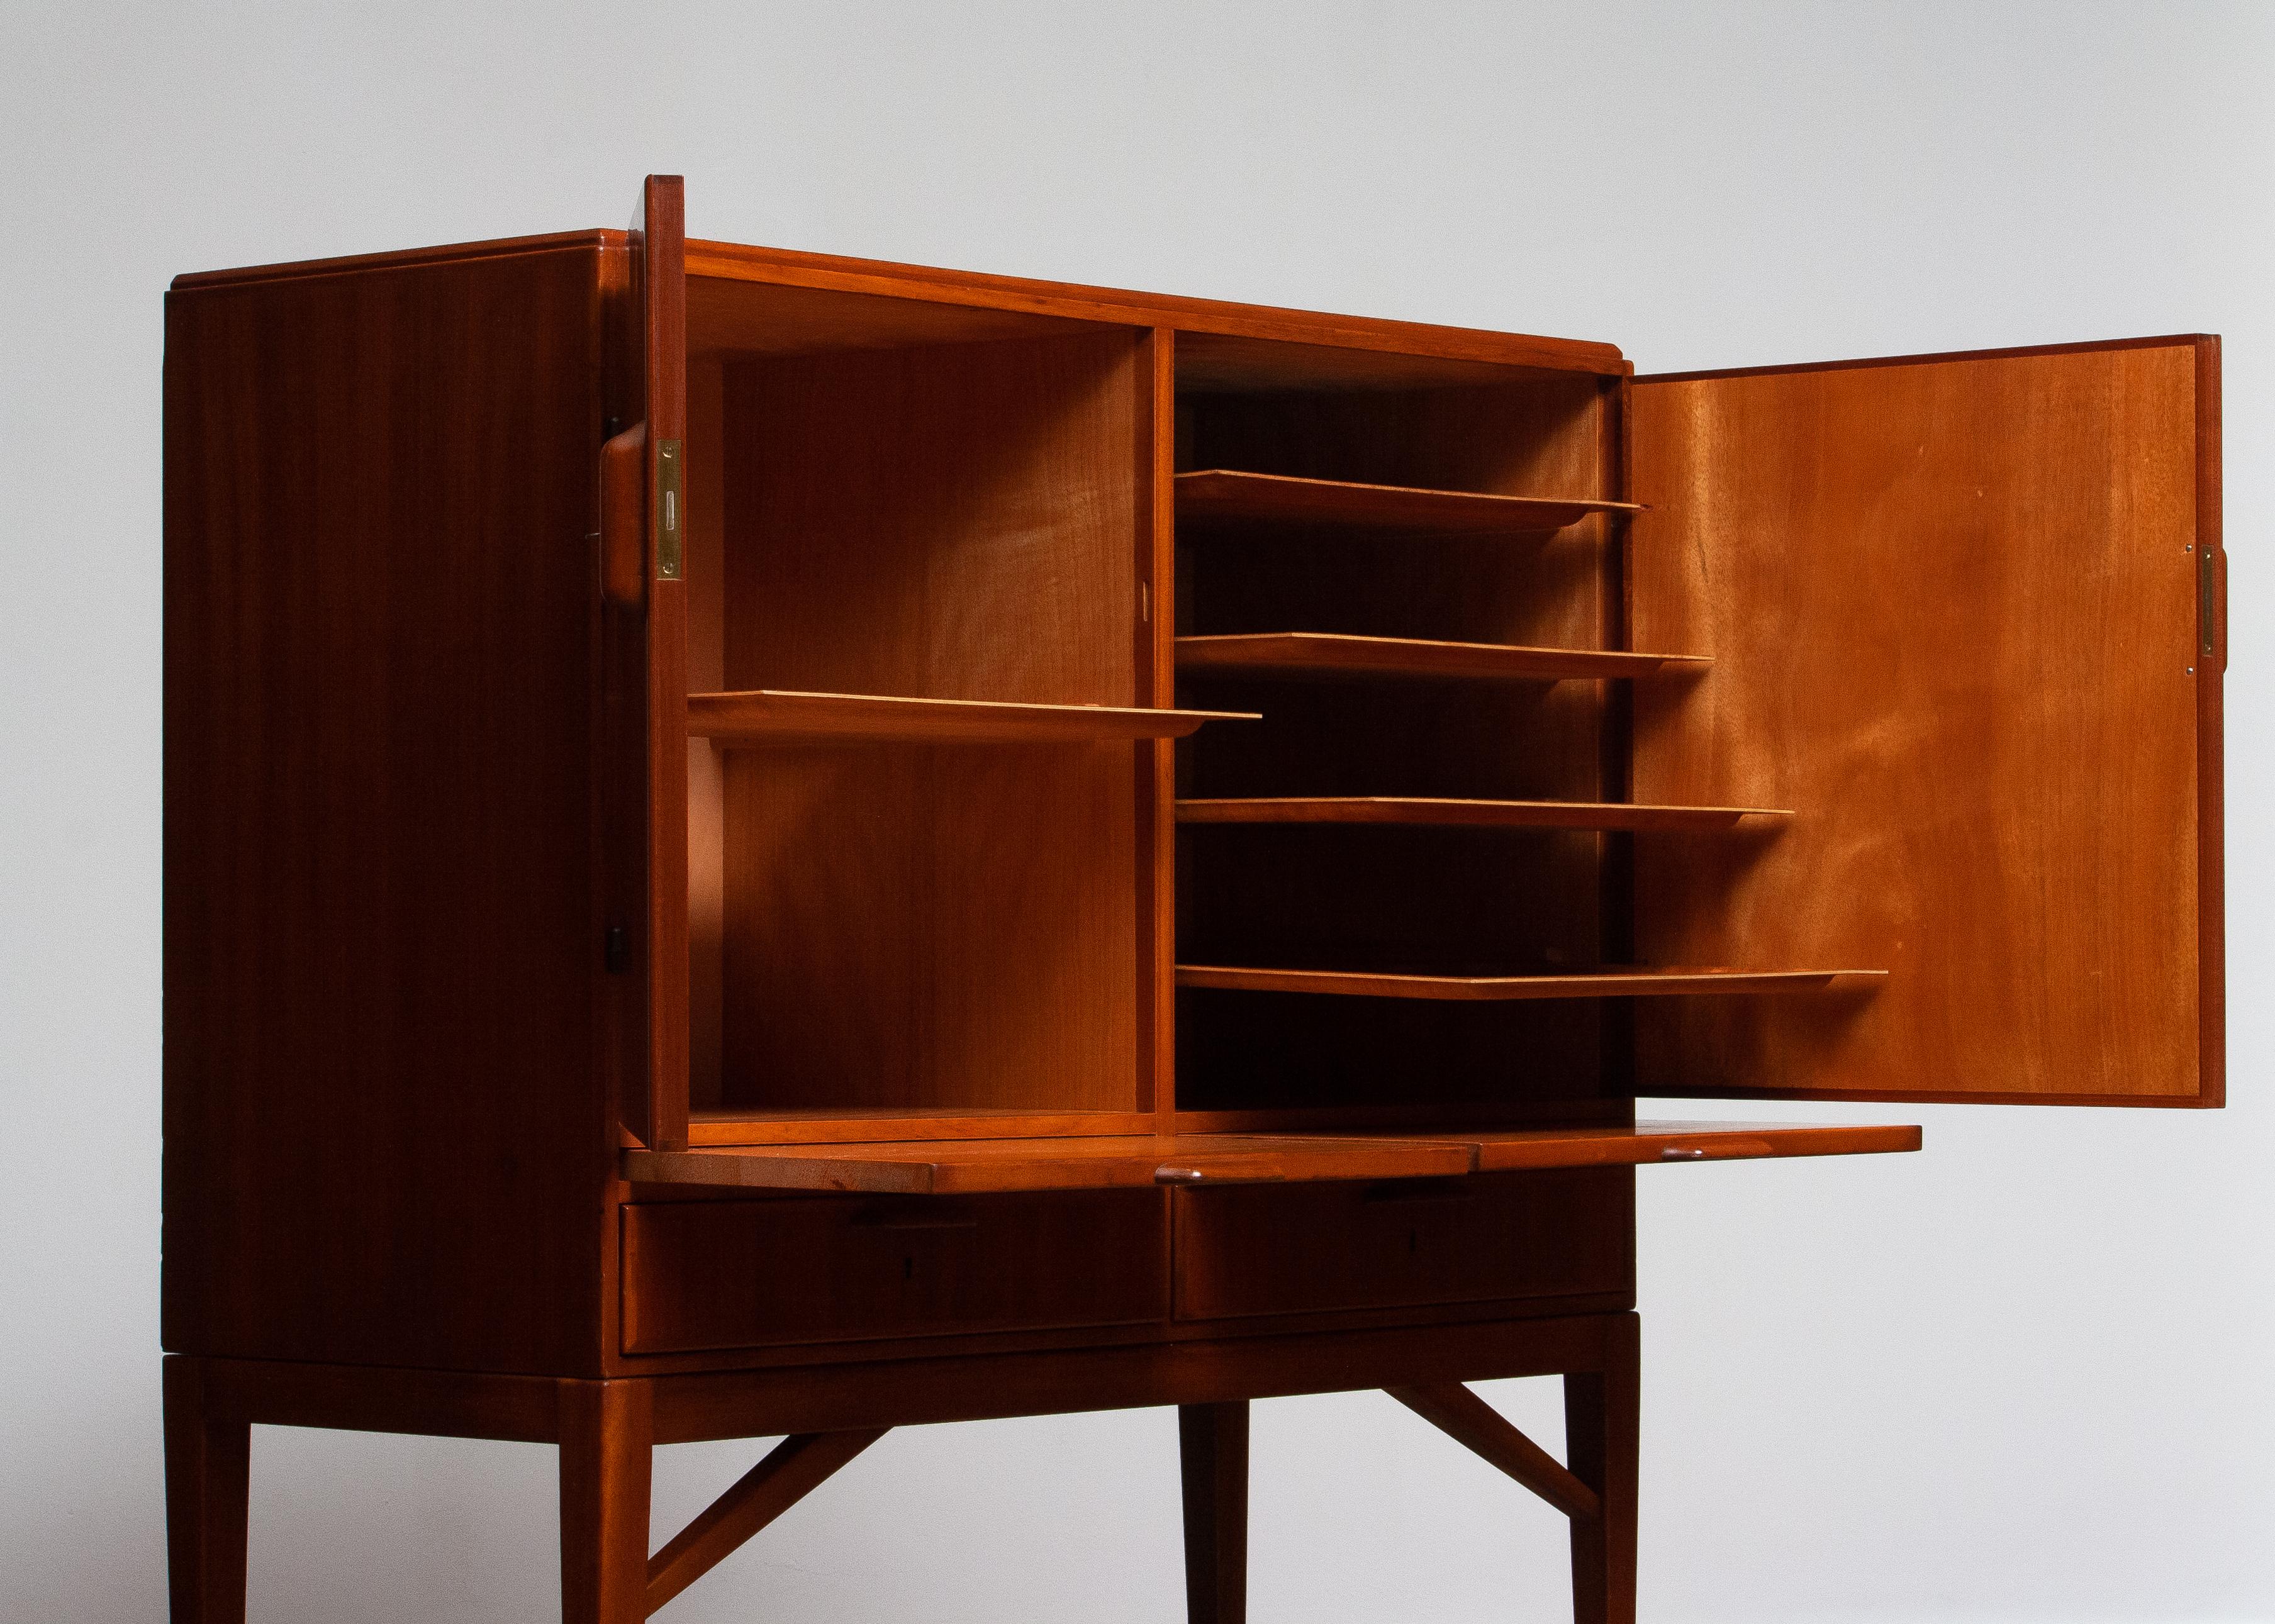 Mid-Century Modern 1950s, High Quality Mahogany Dry Bar / Cabinet Made by Marbo Sweden, SMI Labeled